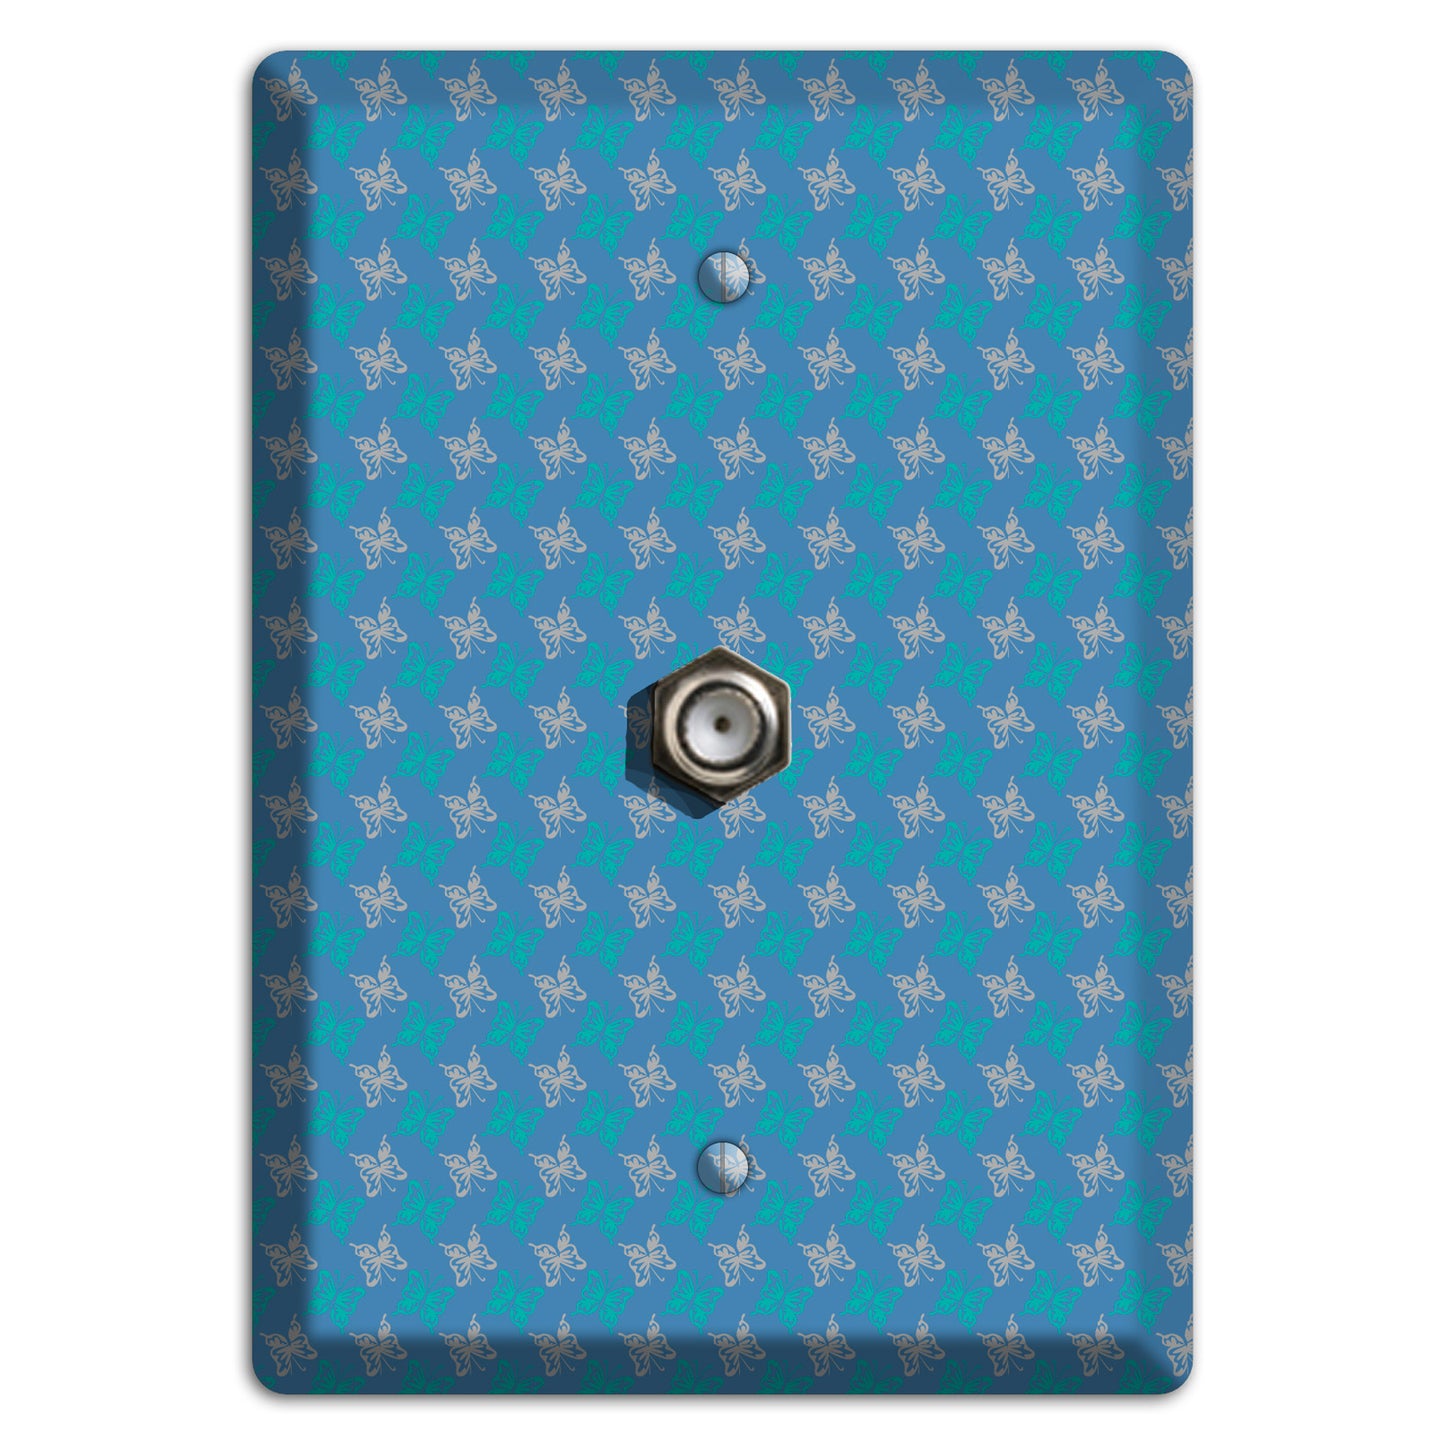 Blue with White and Turquoise Butterflies Cable Wallplate